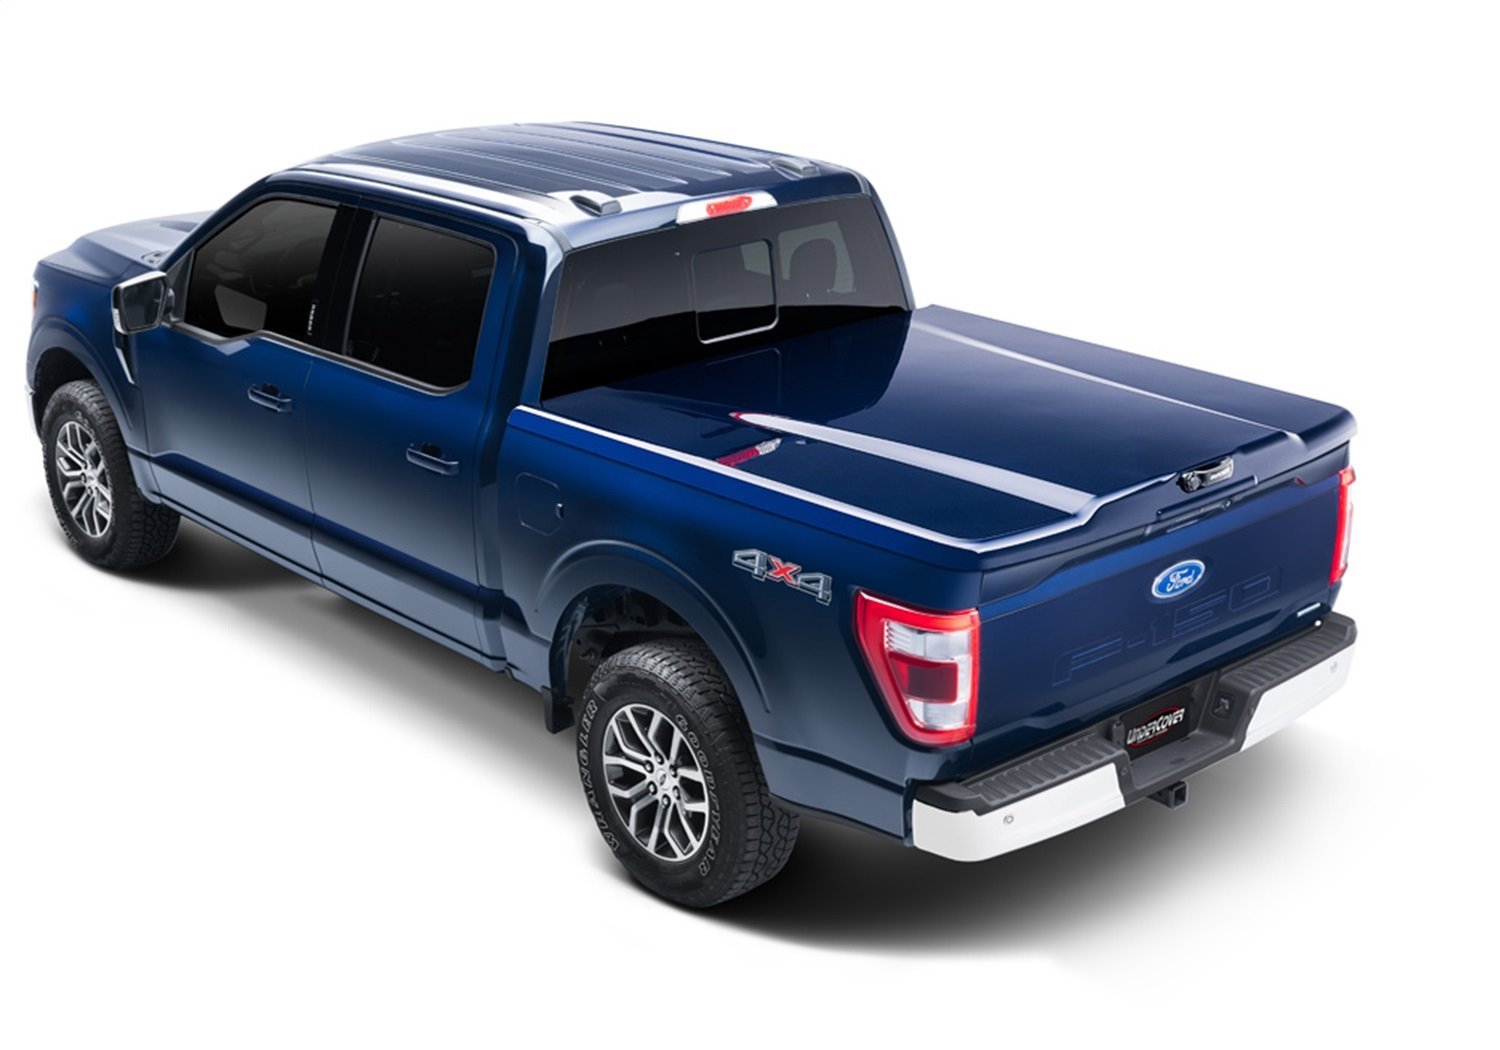 UC2208L-AZ Elite LX Hard Non-Folding Cover, Fits Select Ford F-150 5'7" Bed Crew (Includes Lightning) AZ Star White Tricoat